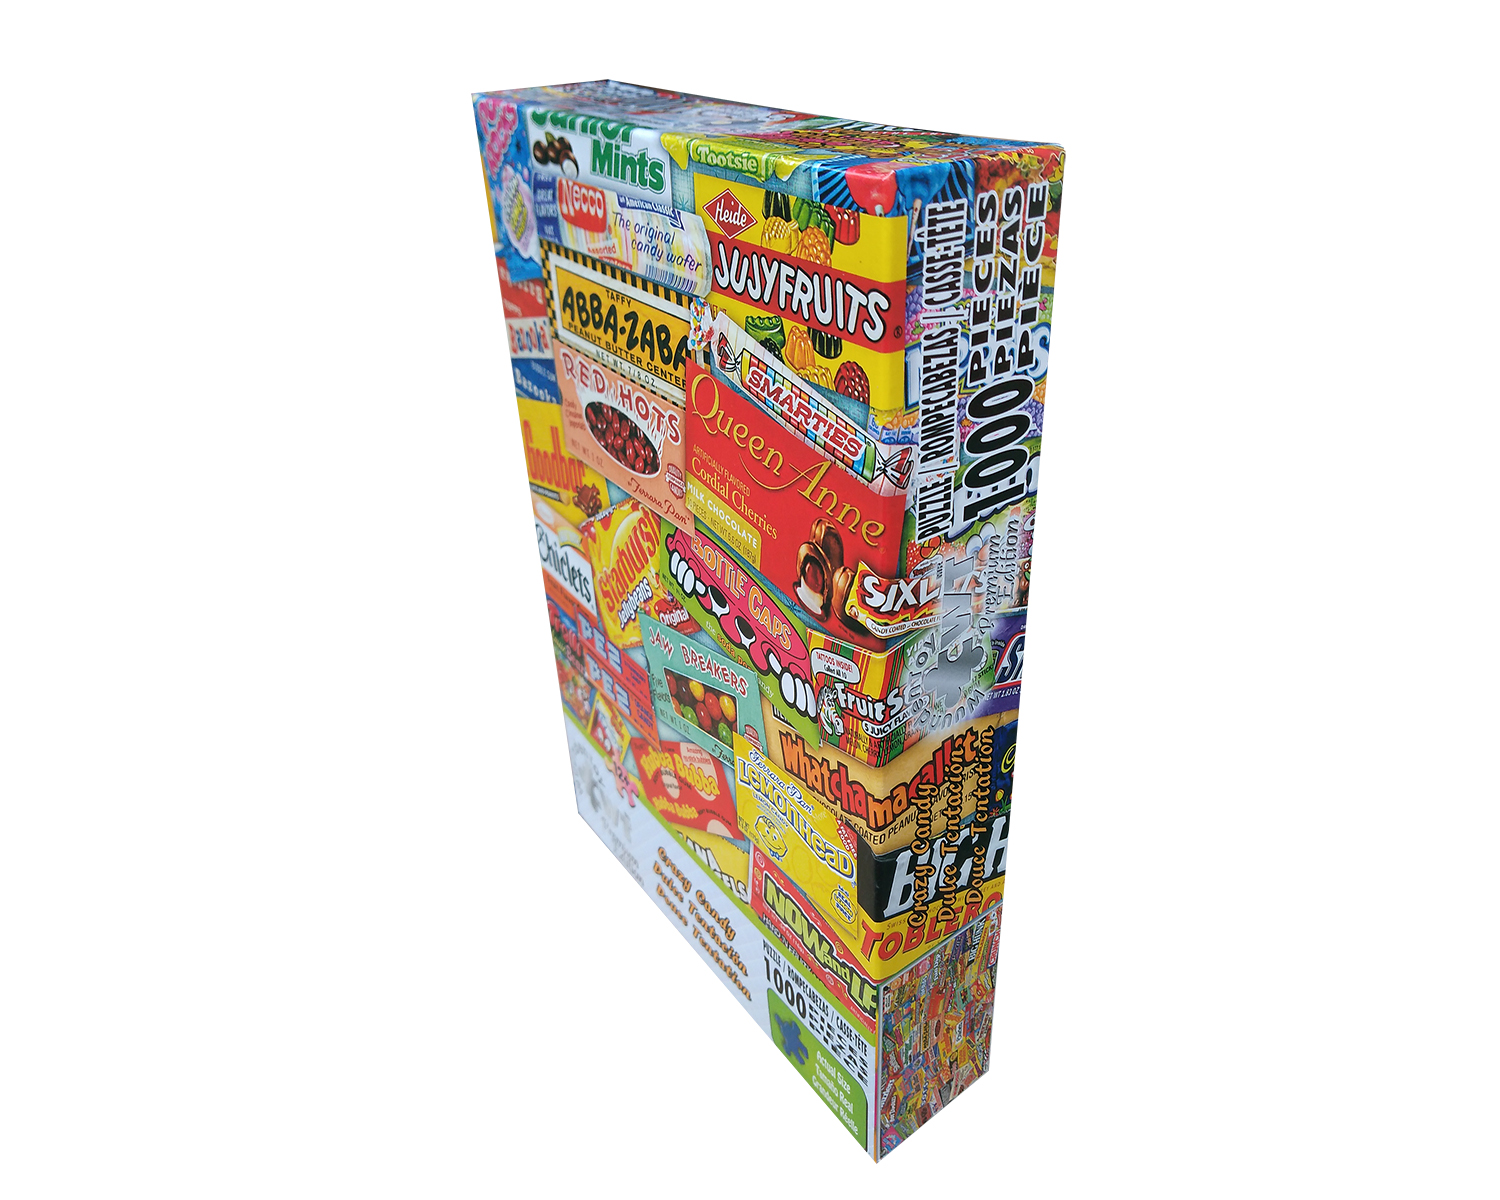 Wuundentoy Premium Edition "Crazy Candy" 1000 Pieces Jigsaw Puzzle - image 3 of 4